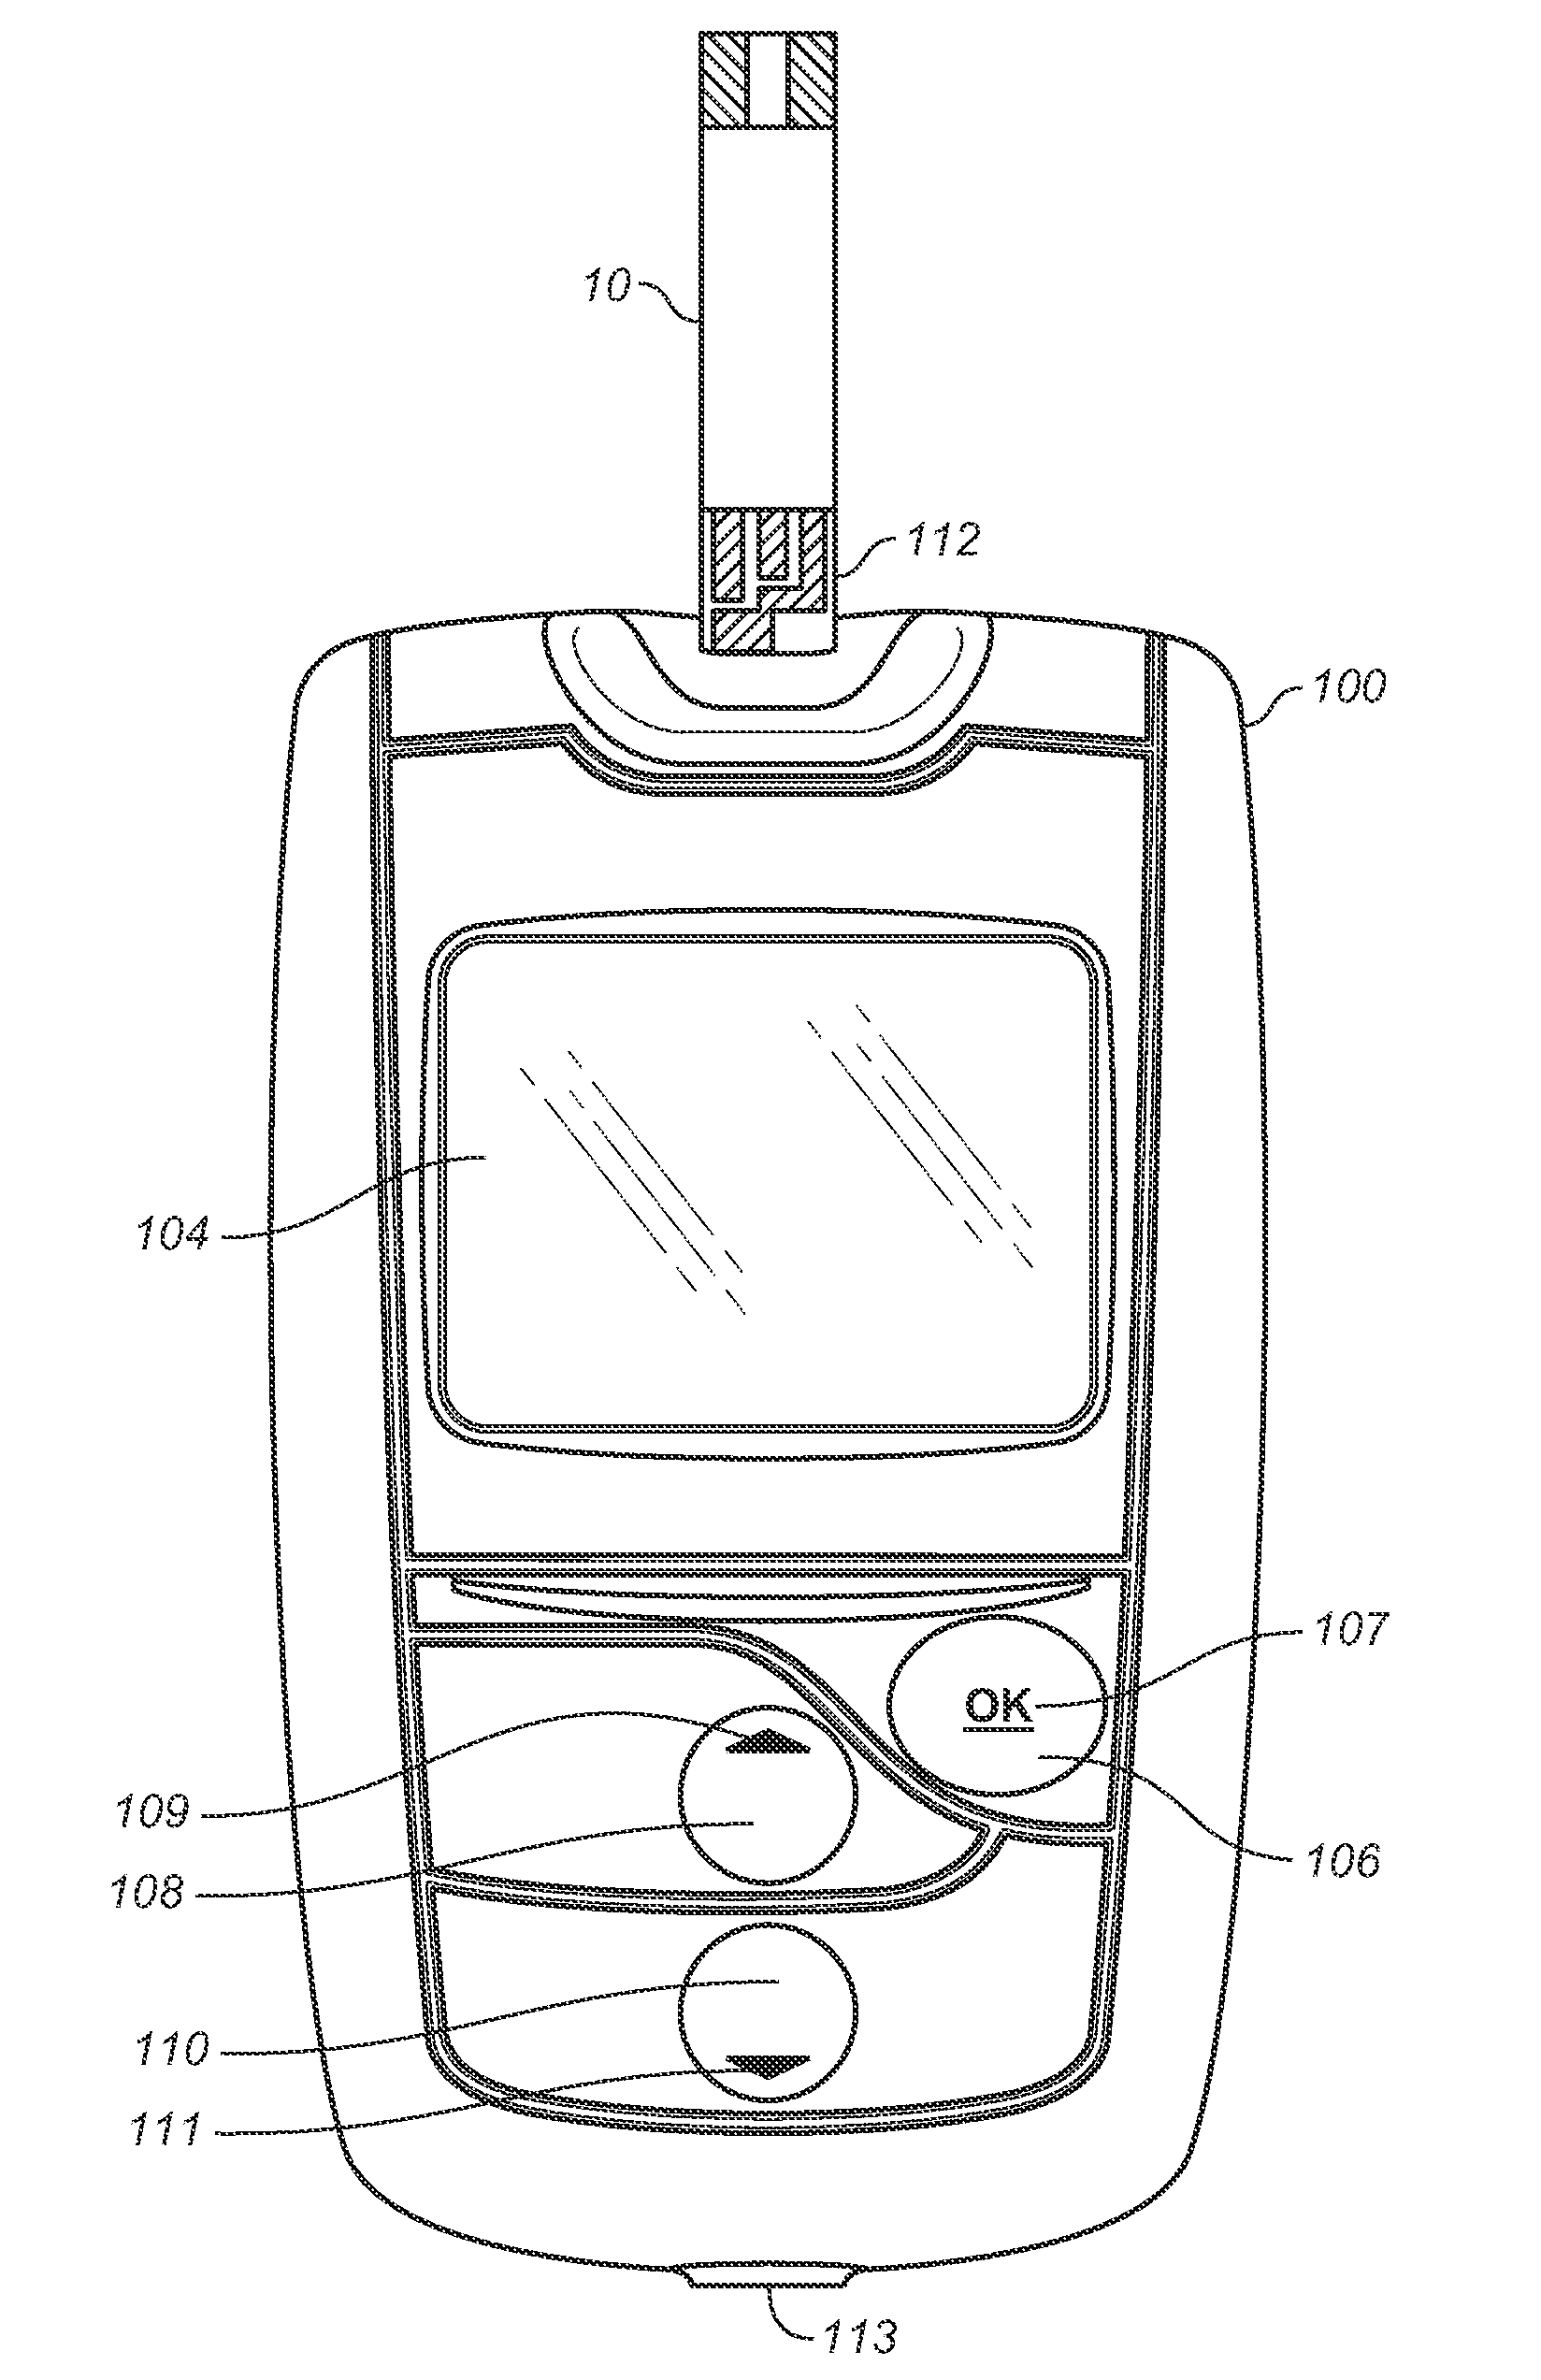 Analyte Measurement and Management Device and Associated Methods